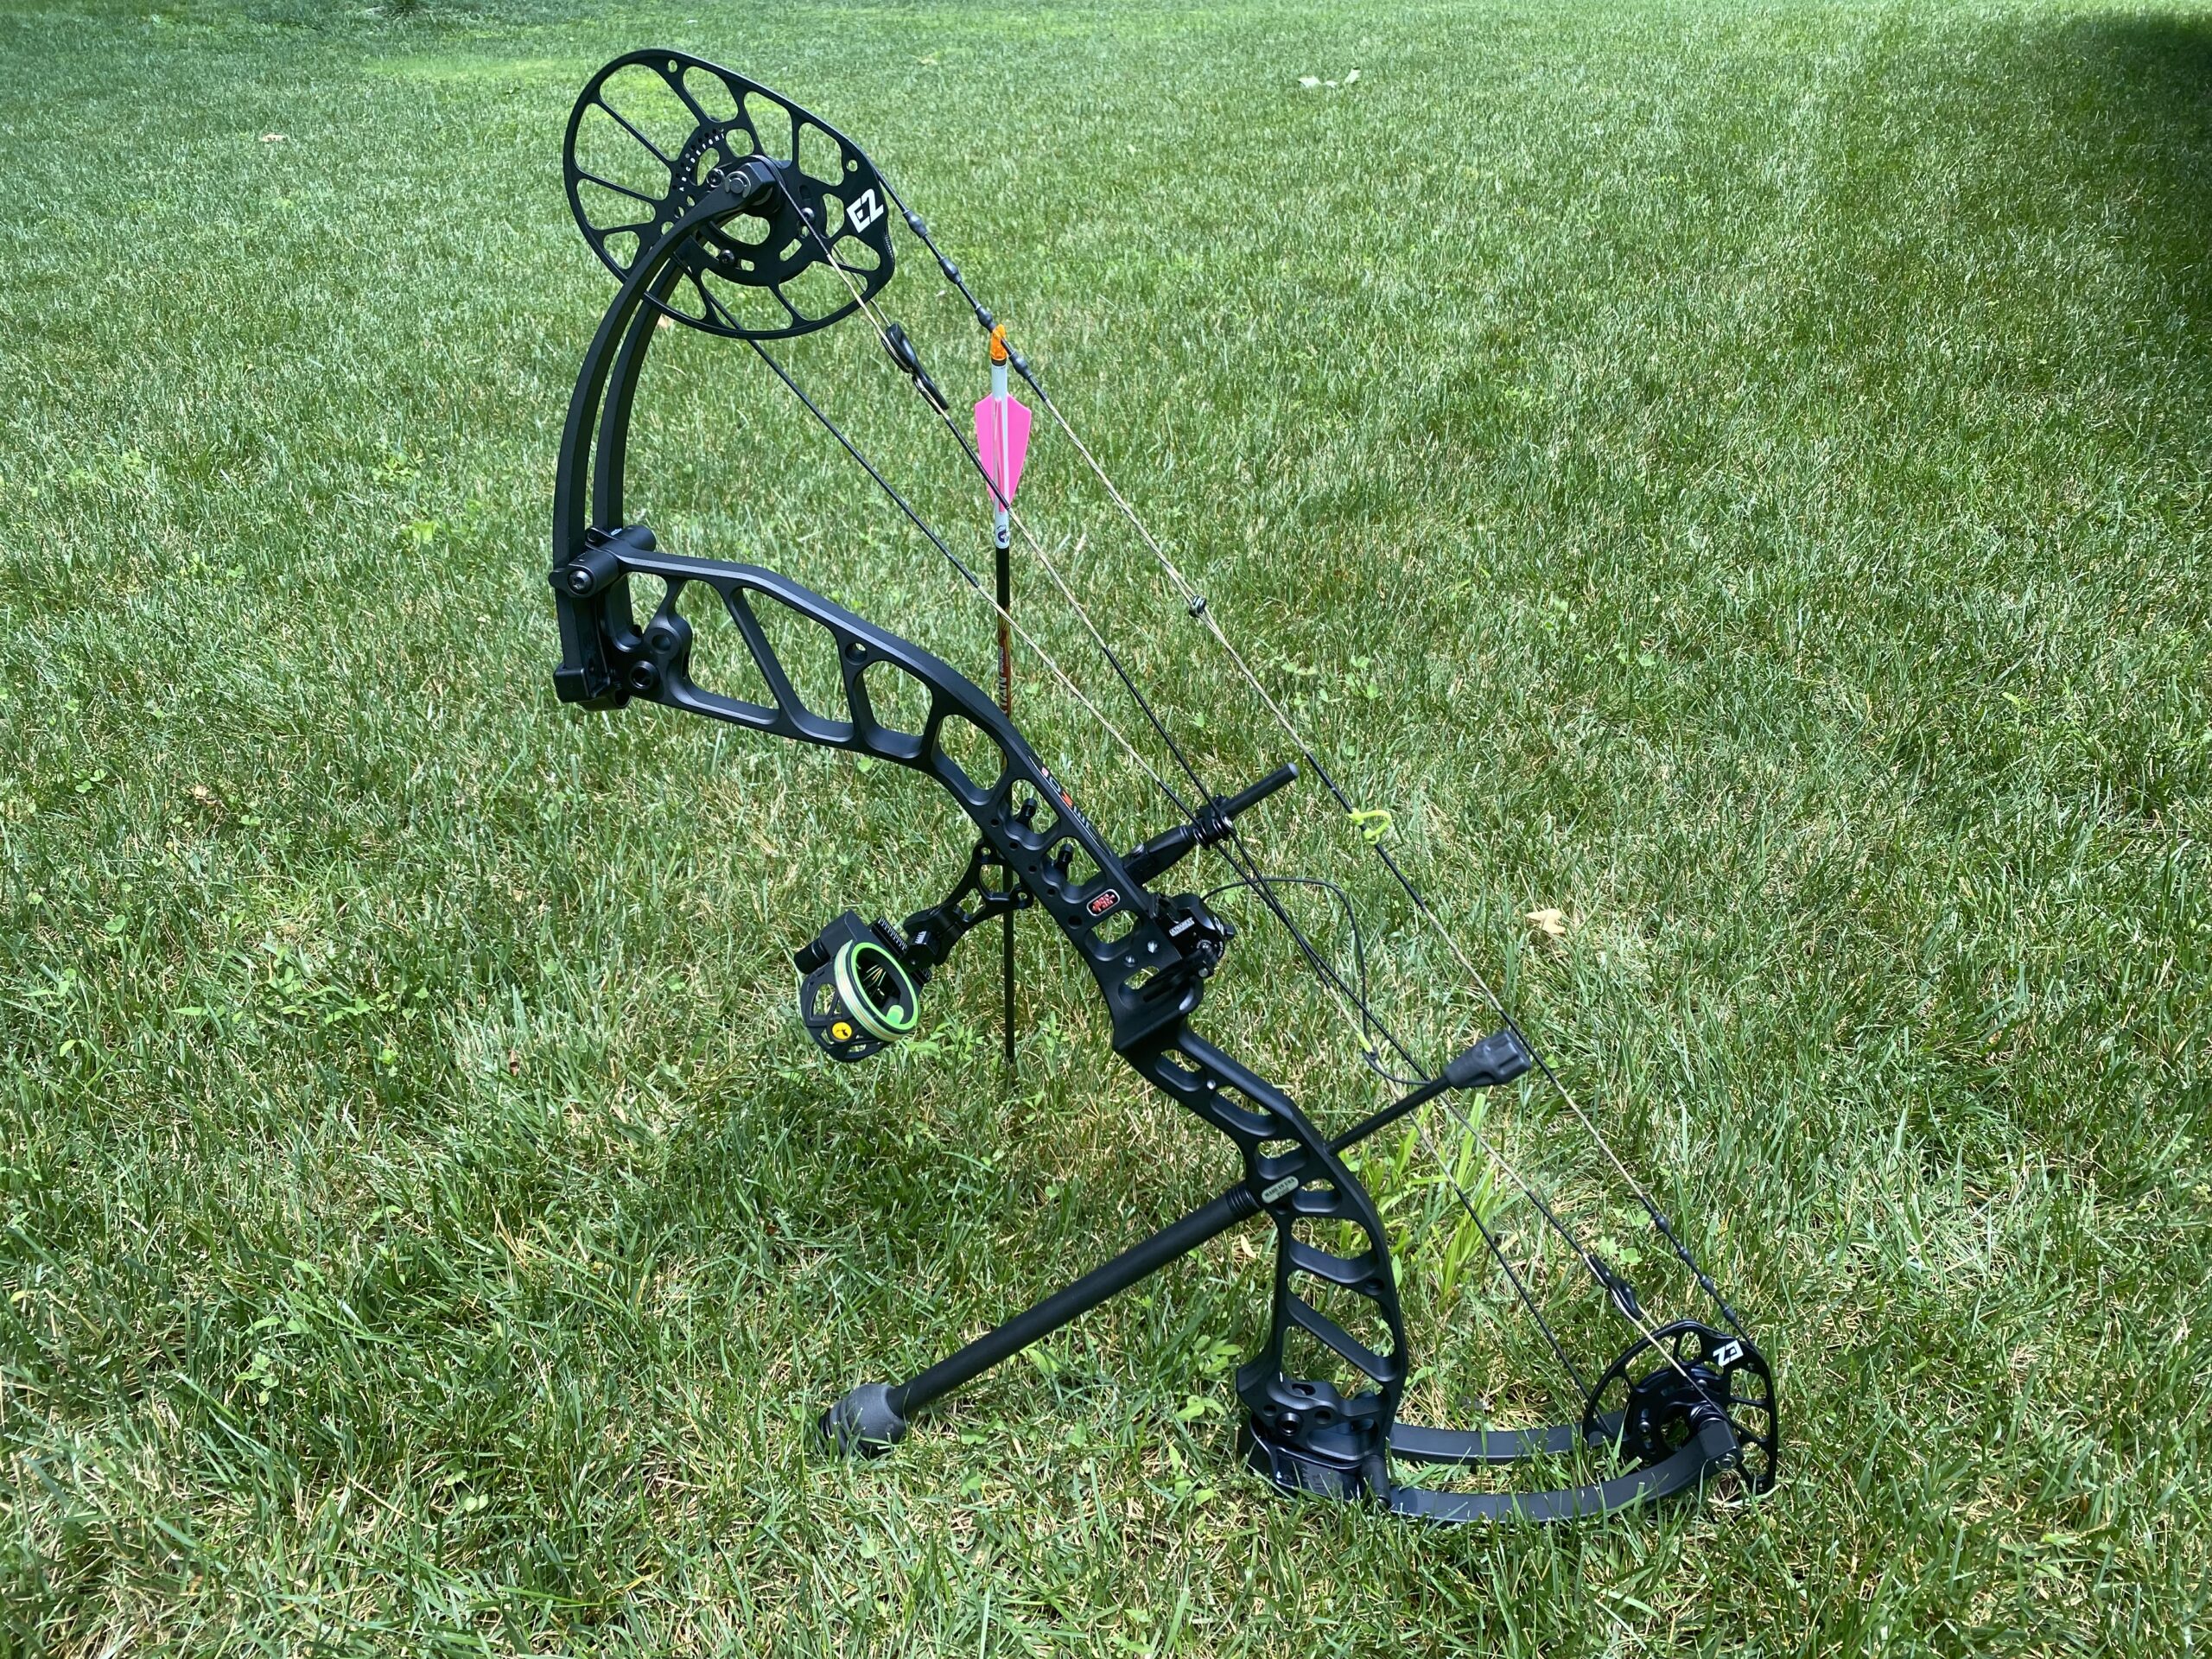 The PSE Omen is a speed bow that's comfortable to shoot